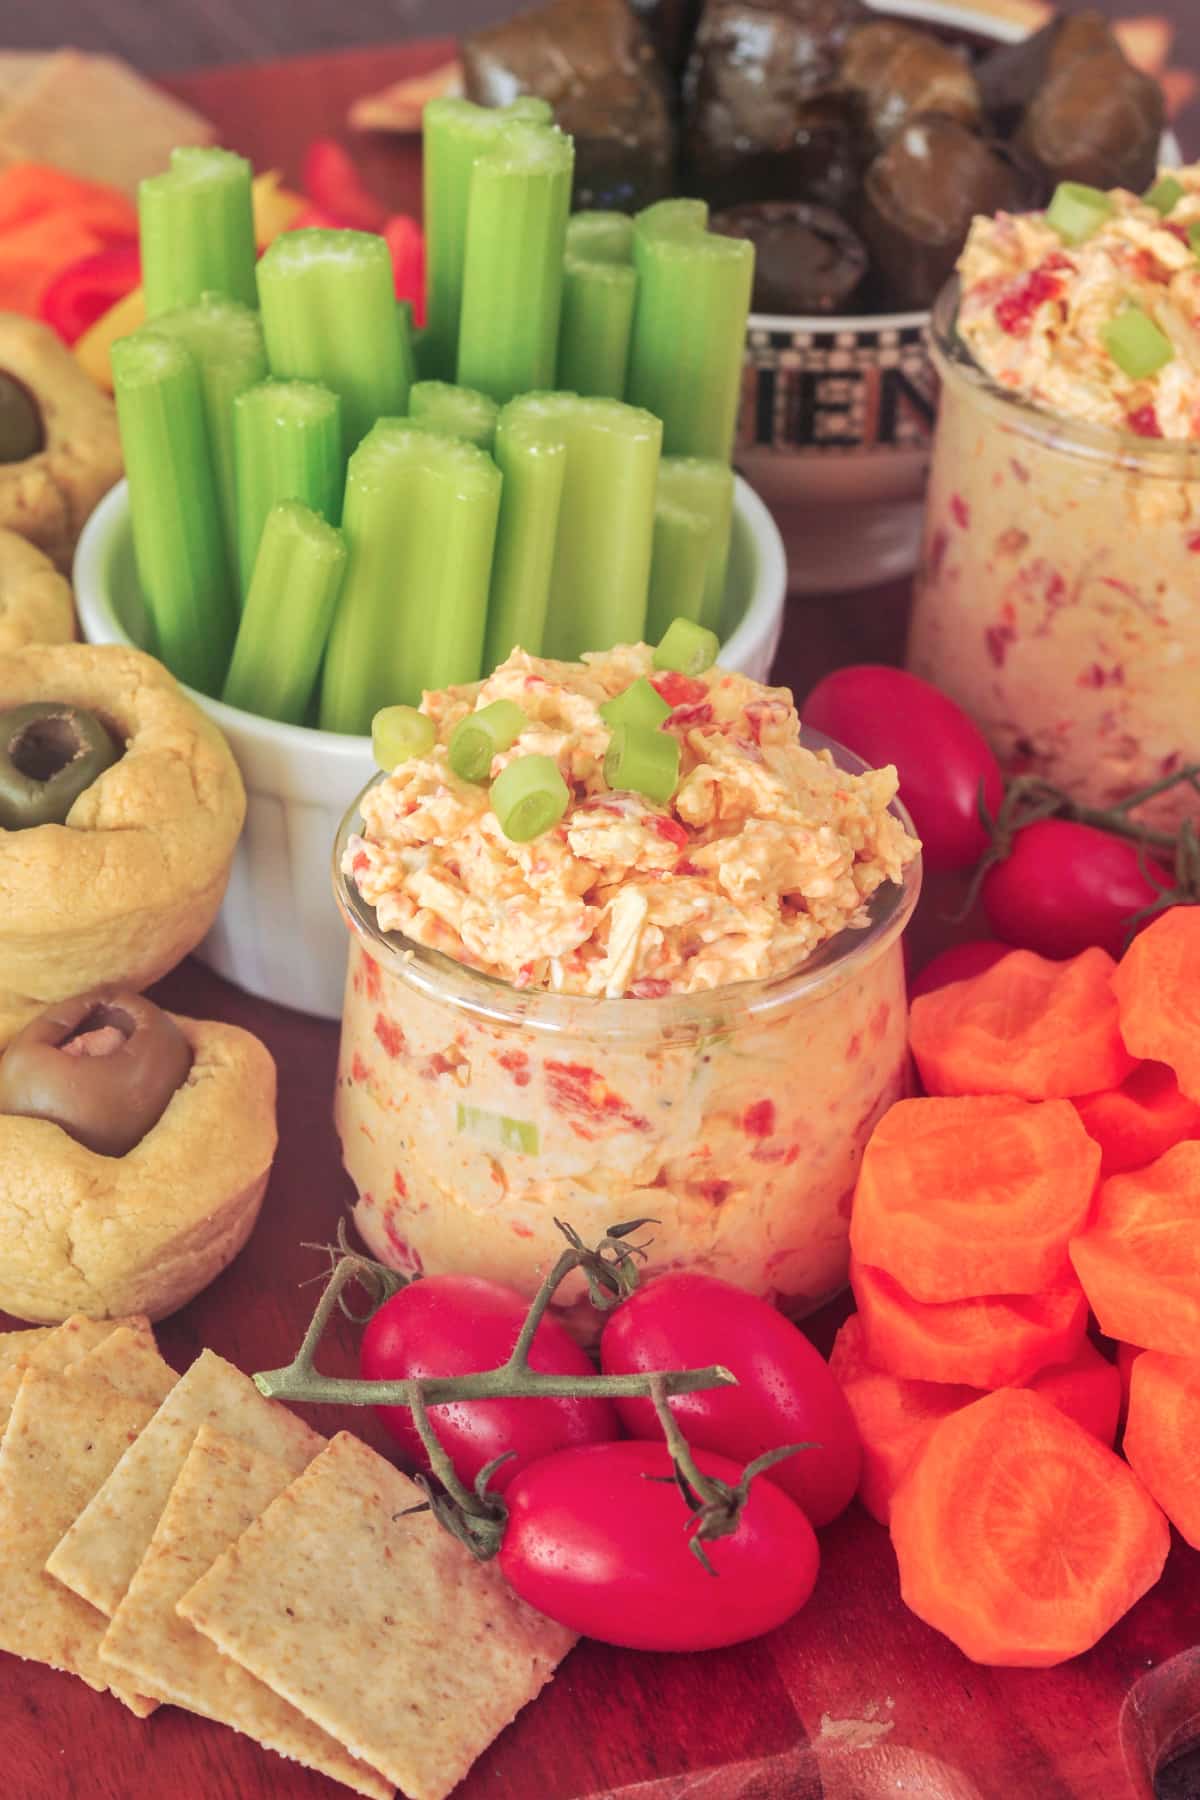 Pimiento cheese in a small glass jar, surrounded by veggies and crackers on a snack board.